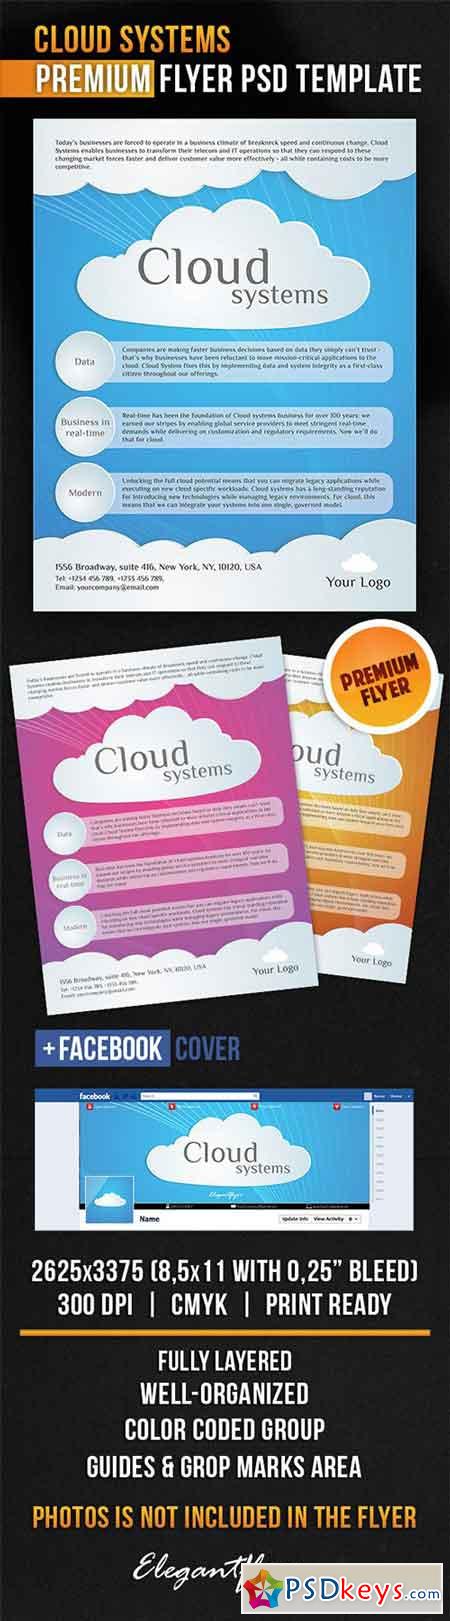 Cloud Systems Flyer PSD Template + Facebook Cover